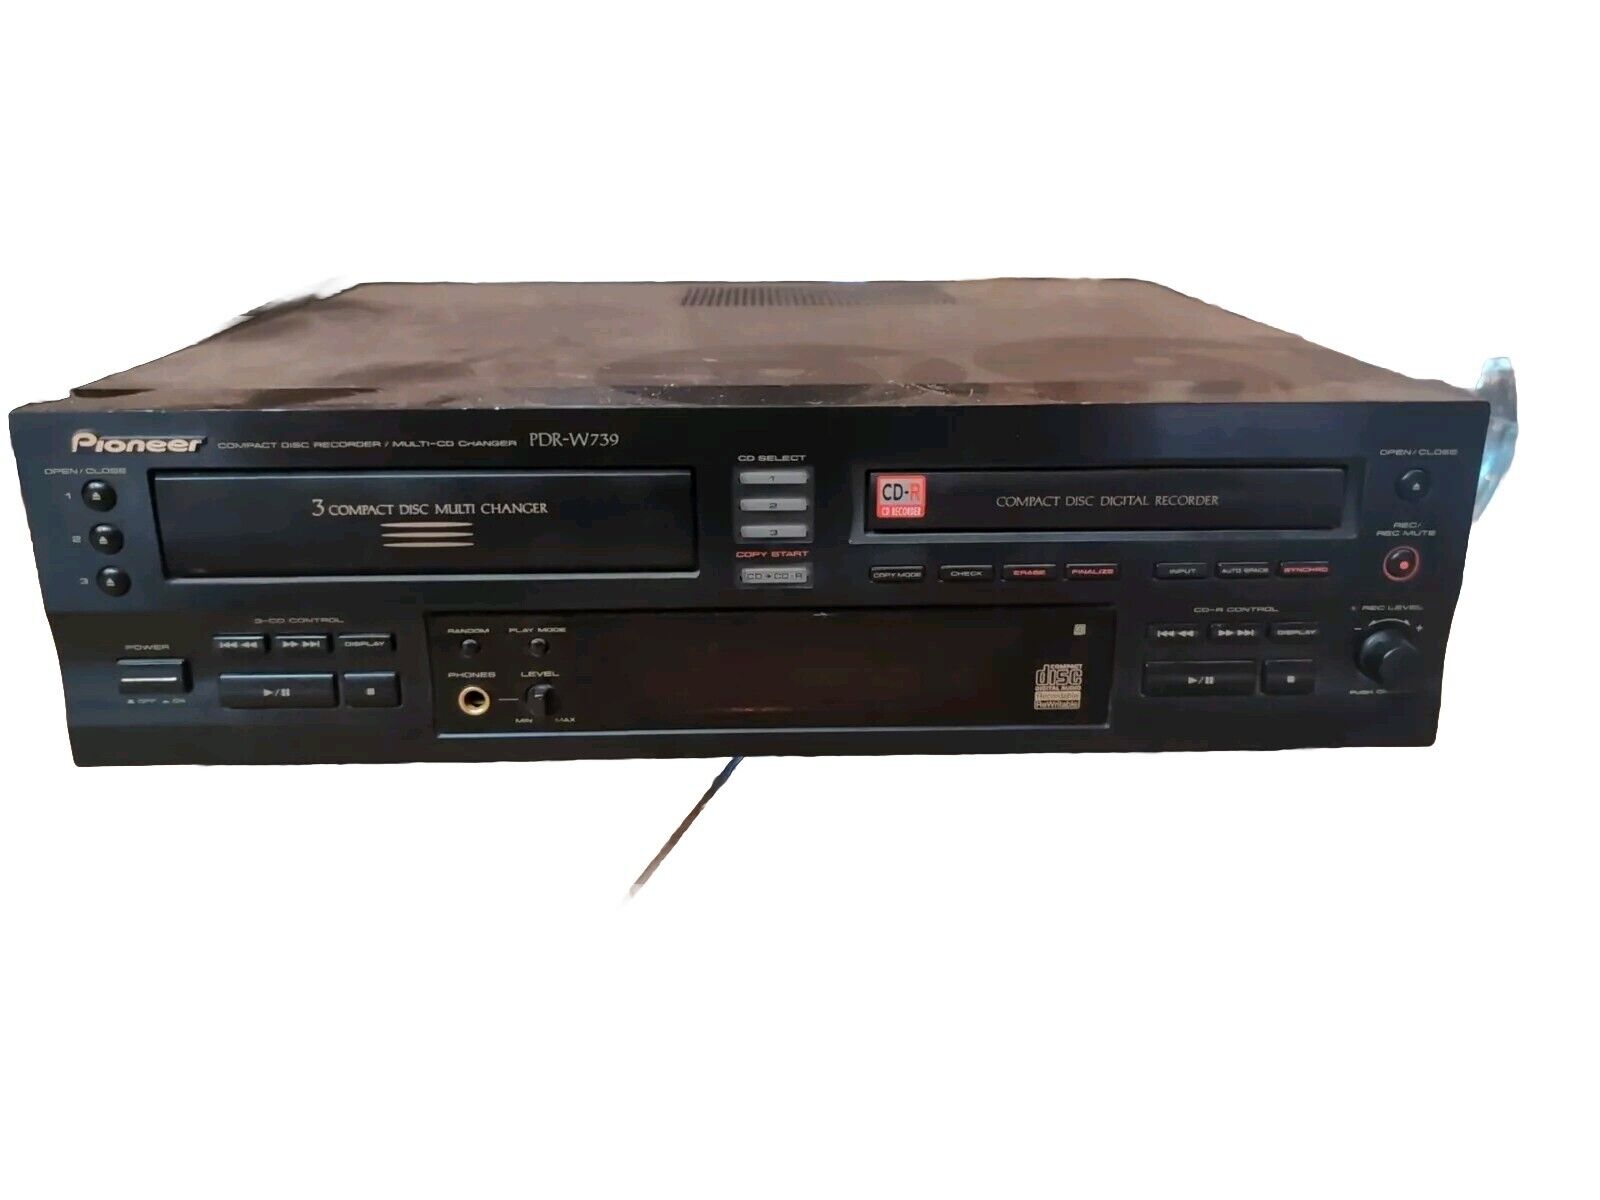 Vintage Pioneer PDR-W739 3 CD Player Recorder Works Excellent Has Power Cable 